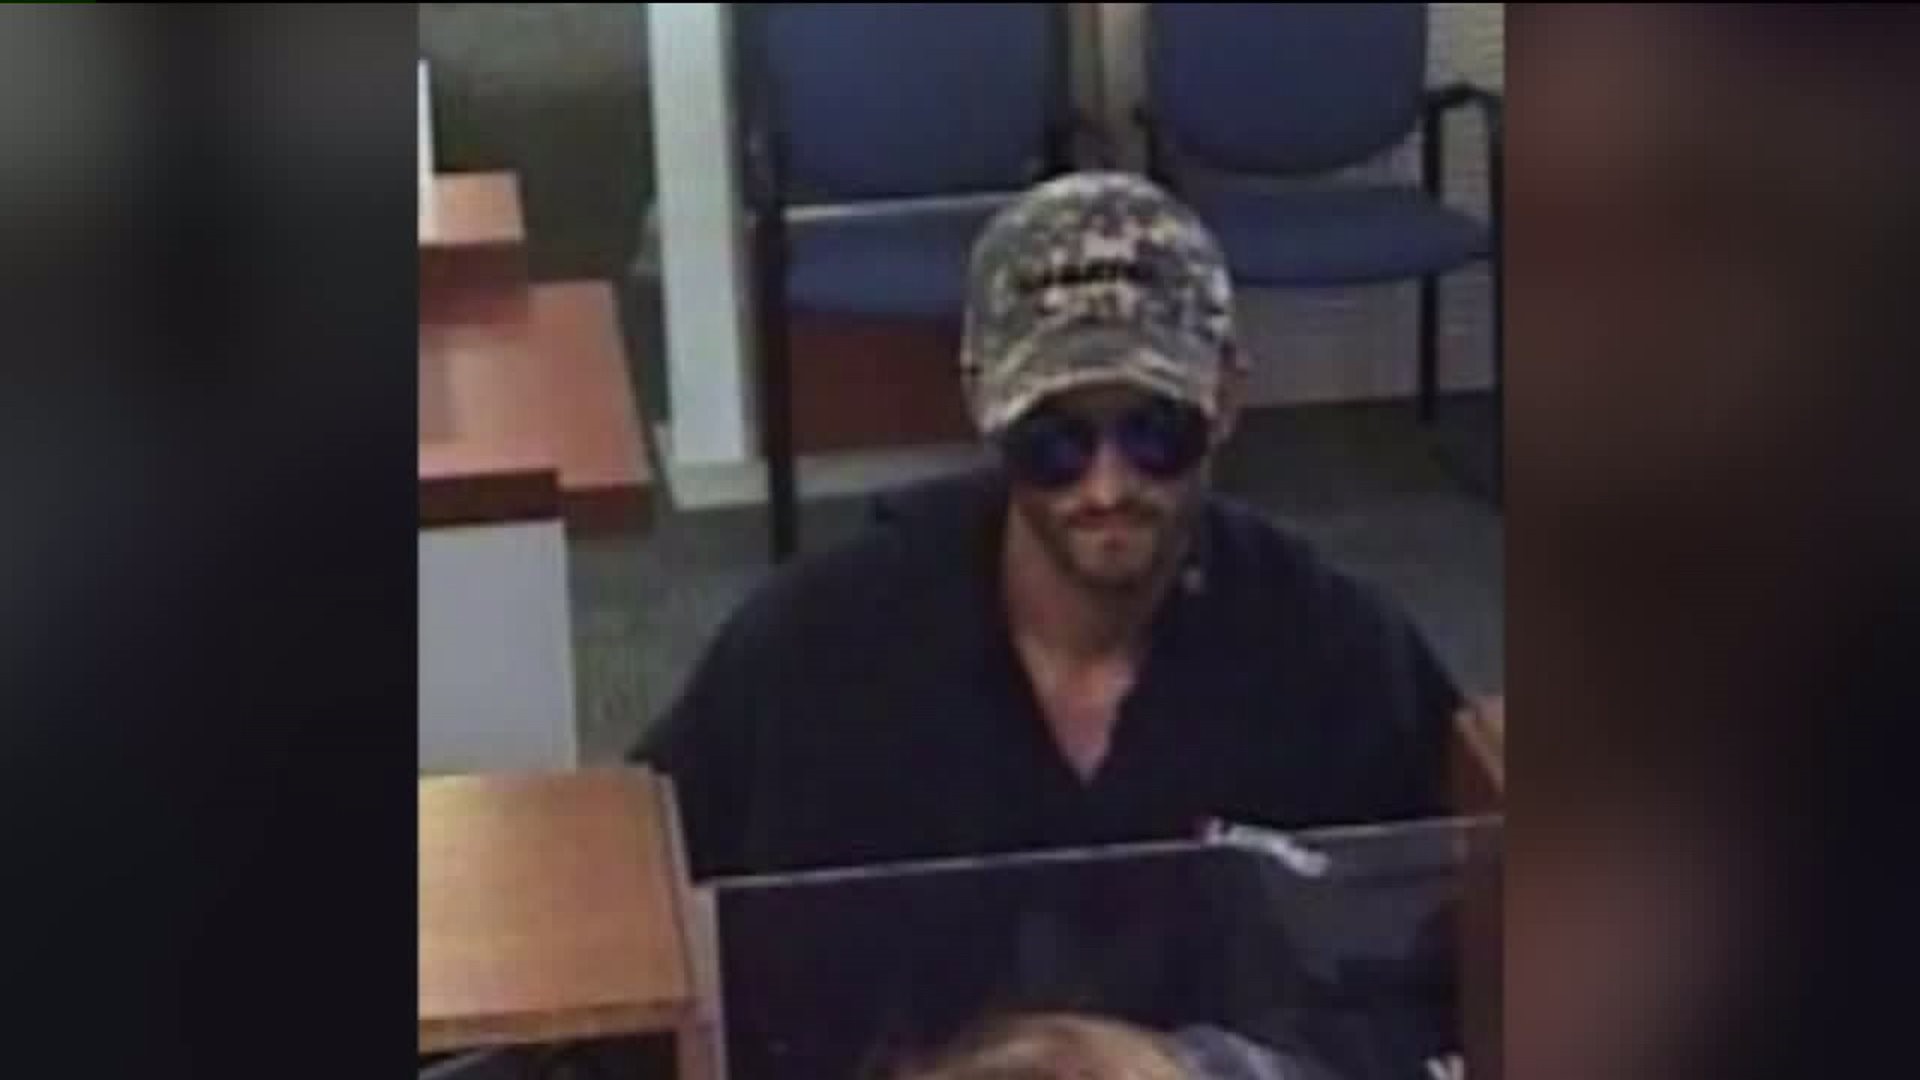 Bank in Mountain Top Hit by Robber